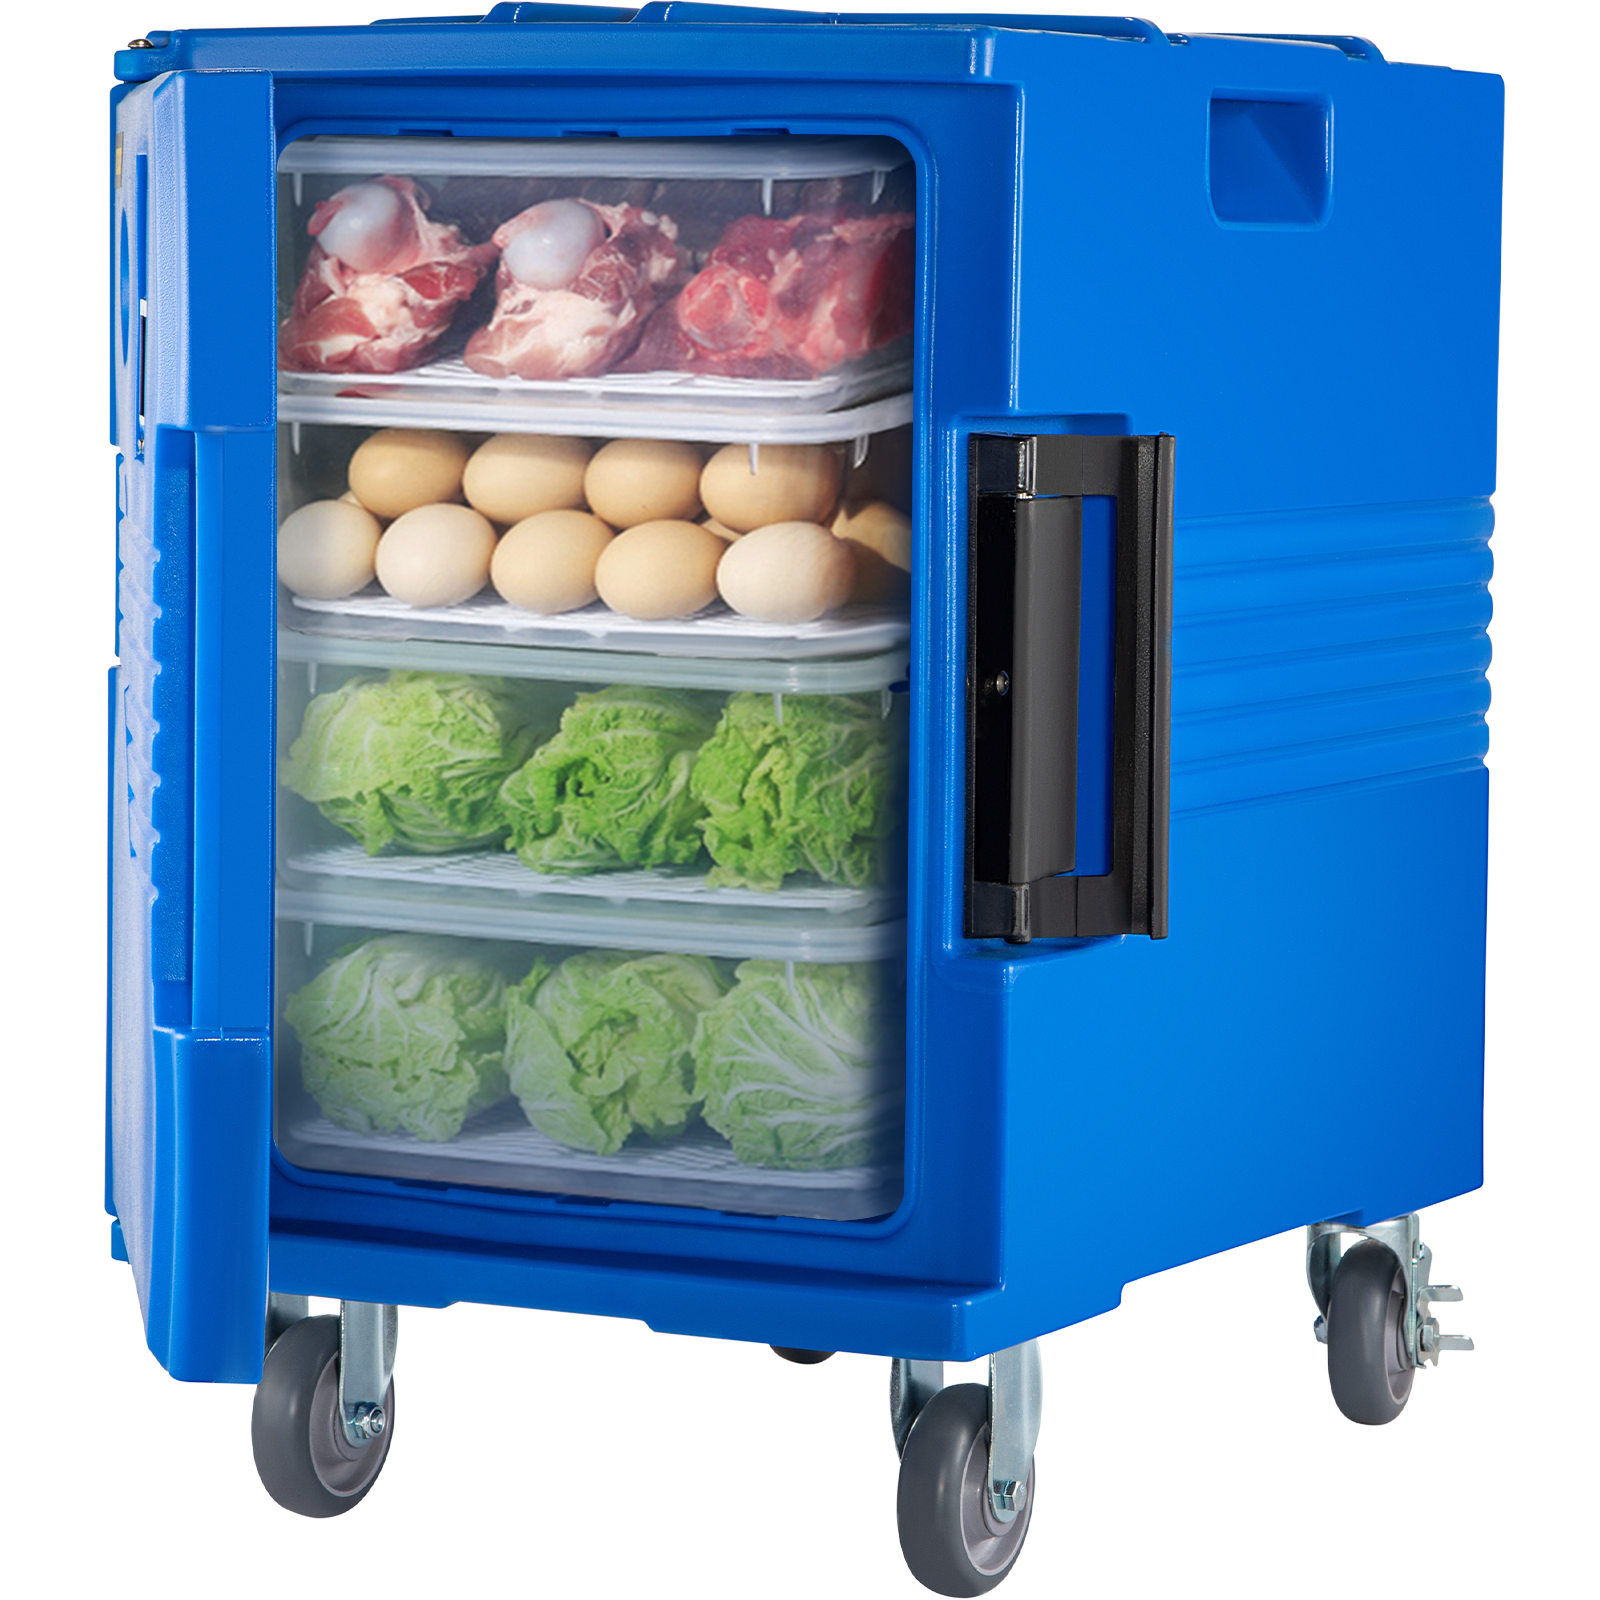 VEVOR Insulated Food Pan Carrier Front Load Catering Box w/ Wheels 82 Qt Blue от Vevor Many GEOs